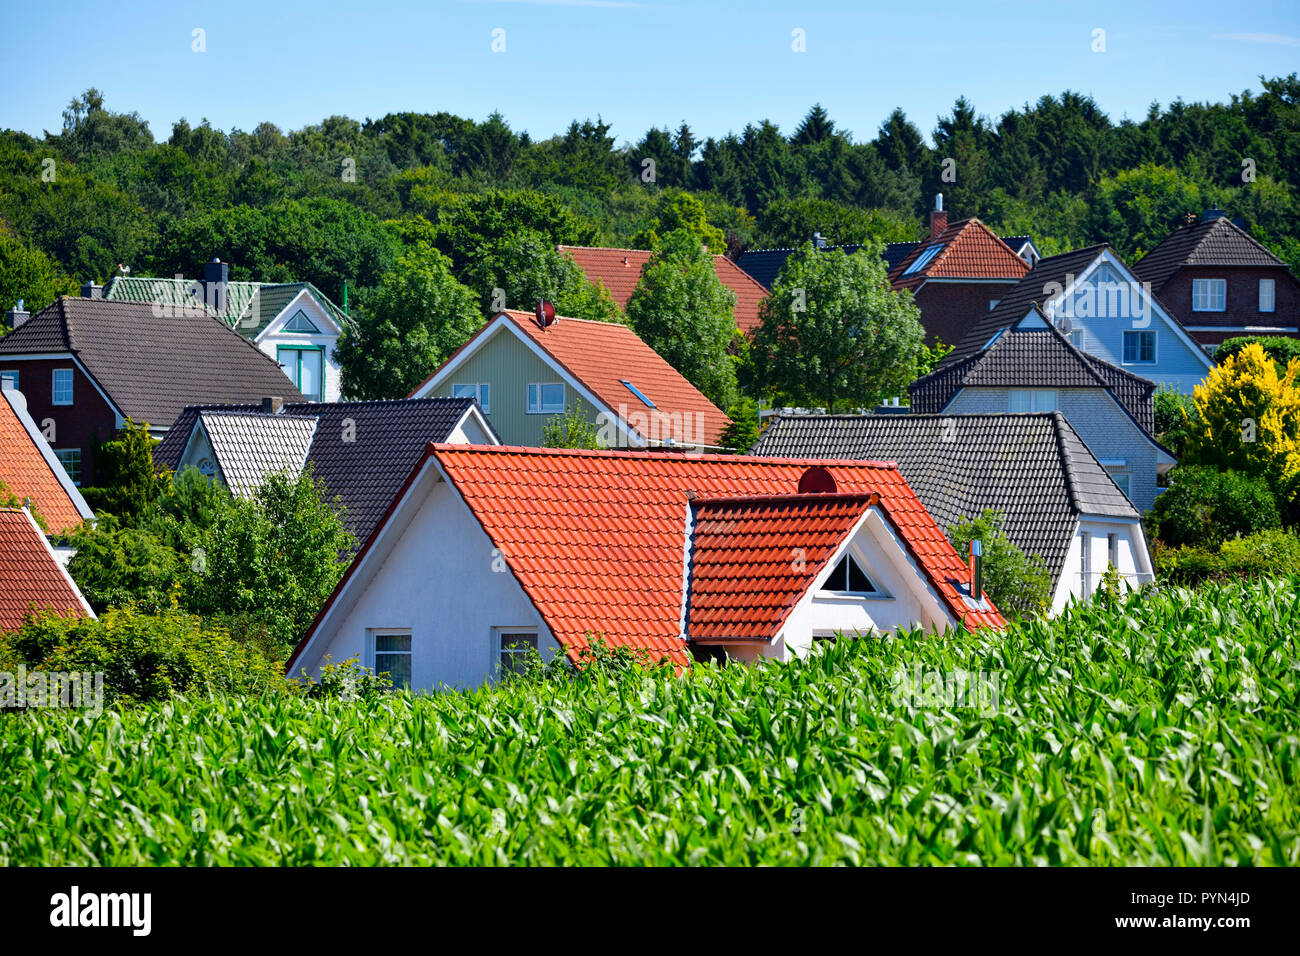 Dwelling houses, residential area in mountain Kling, Schleswig - Holstein, Germany, Wohnhäuser, Wohngebiet in Klingberg, Schleswig-Holstein, Deutschla Stock Photo